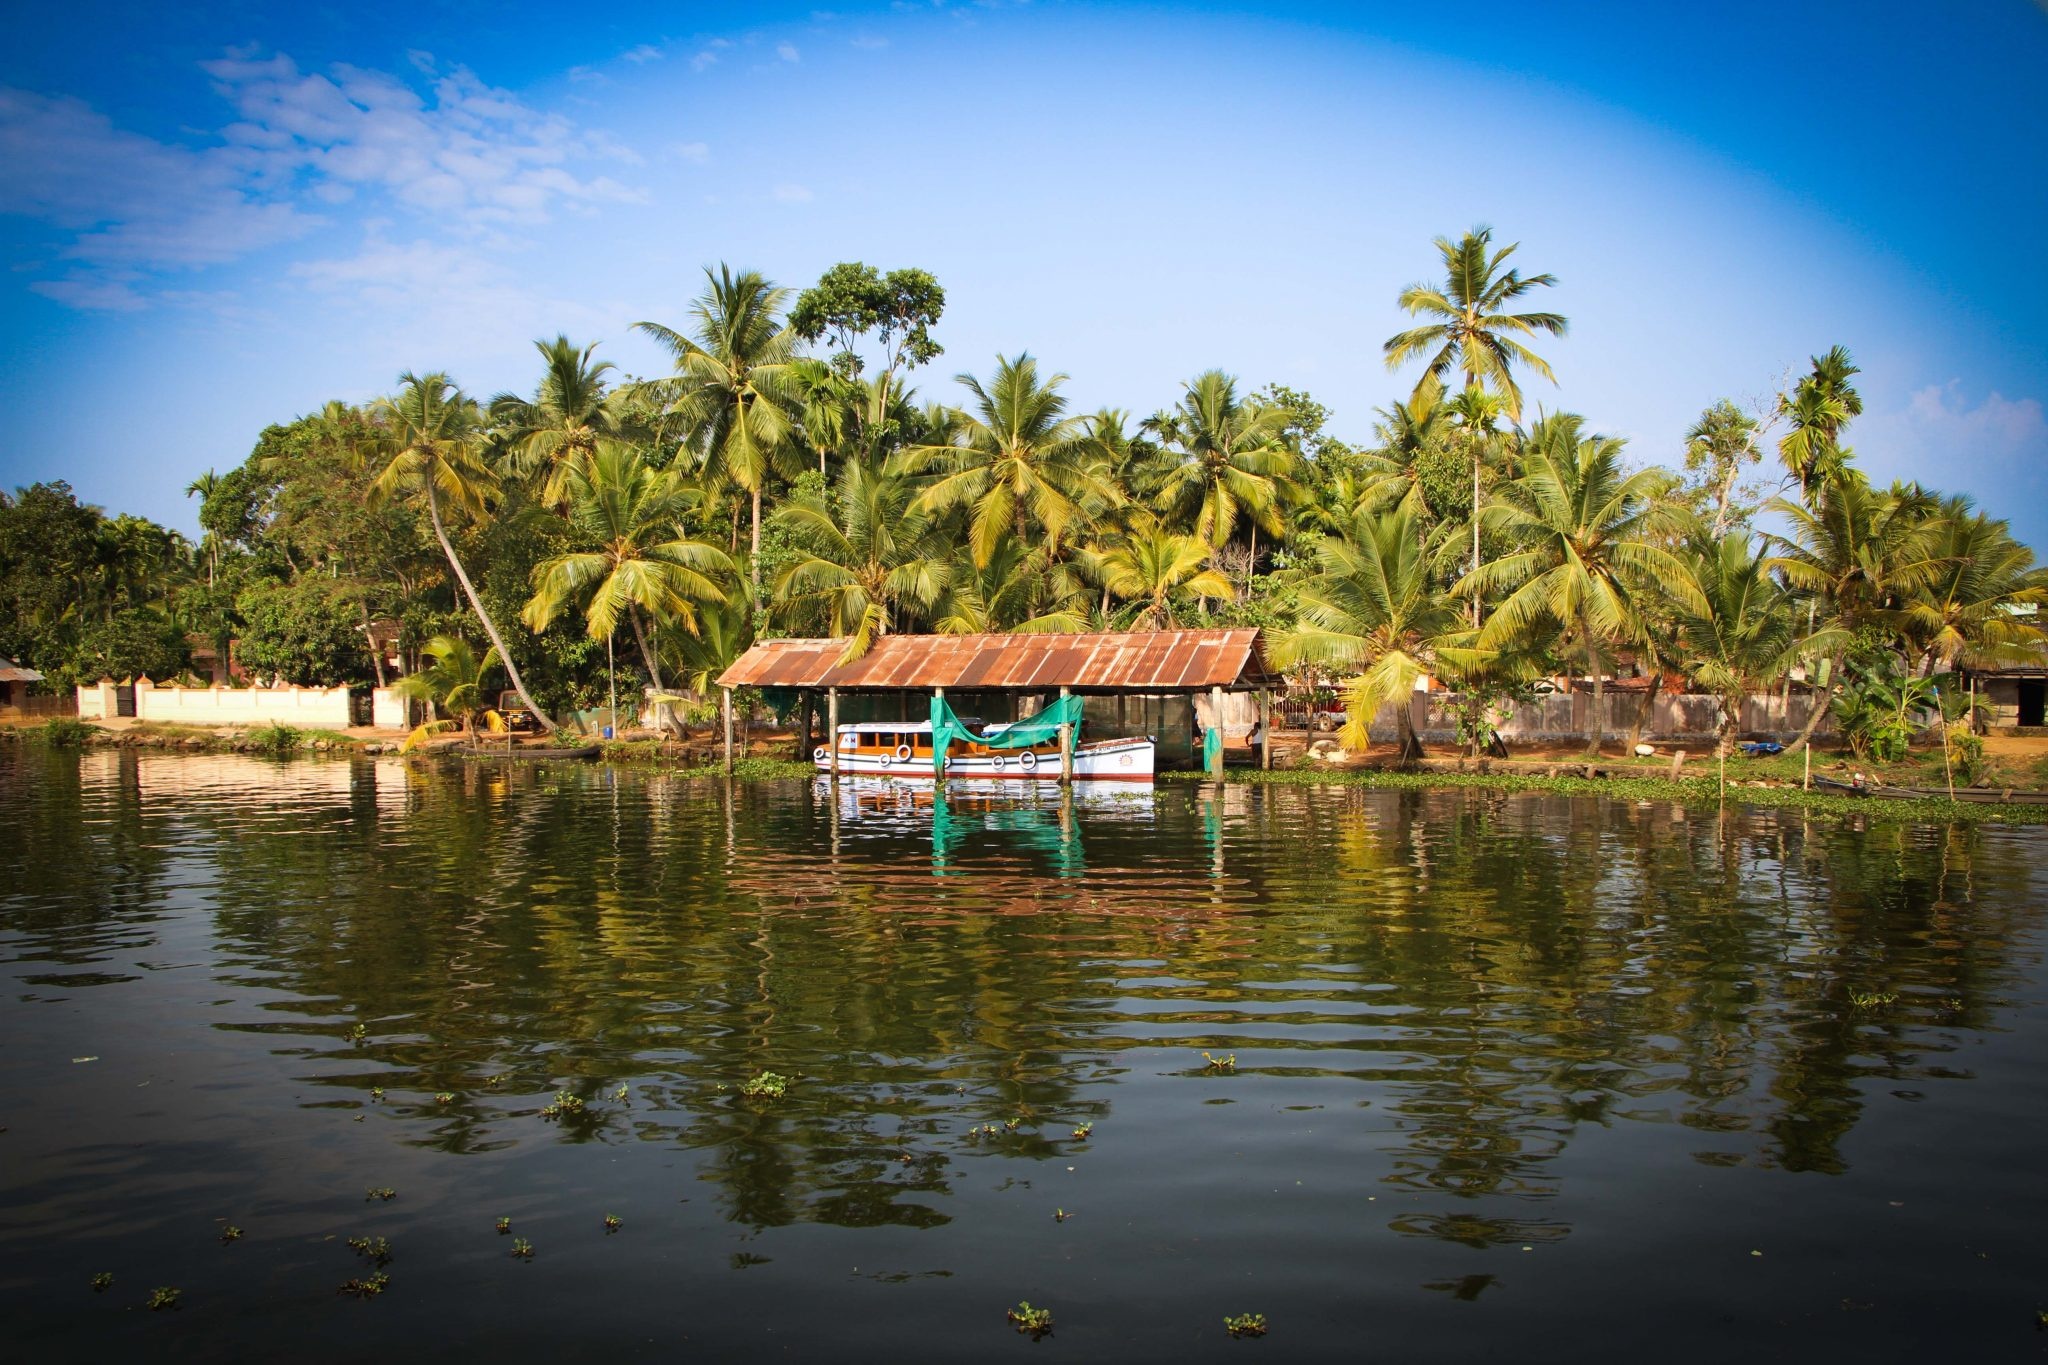 Cruising Kerala backwaters, Houseboat experience, Relaxation on water, Nature's tranquility, 2050x1370 HD Desktop